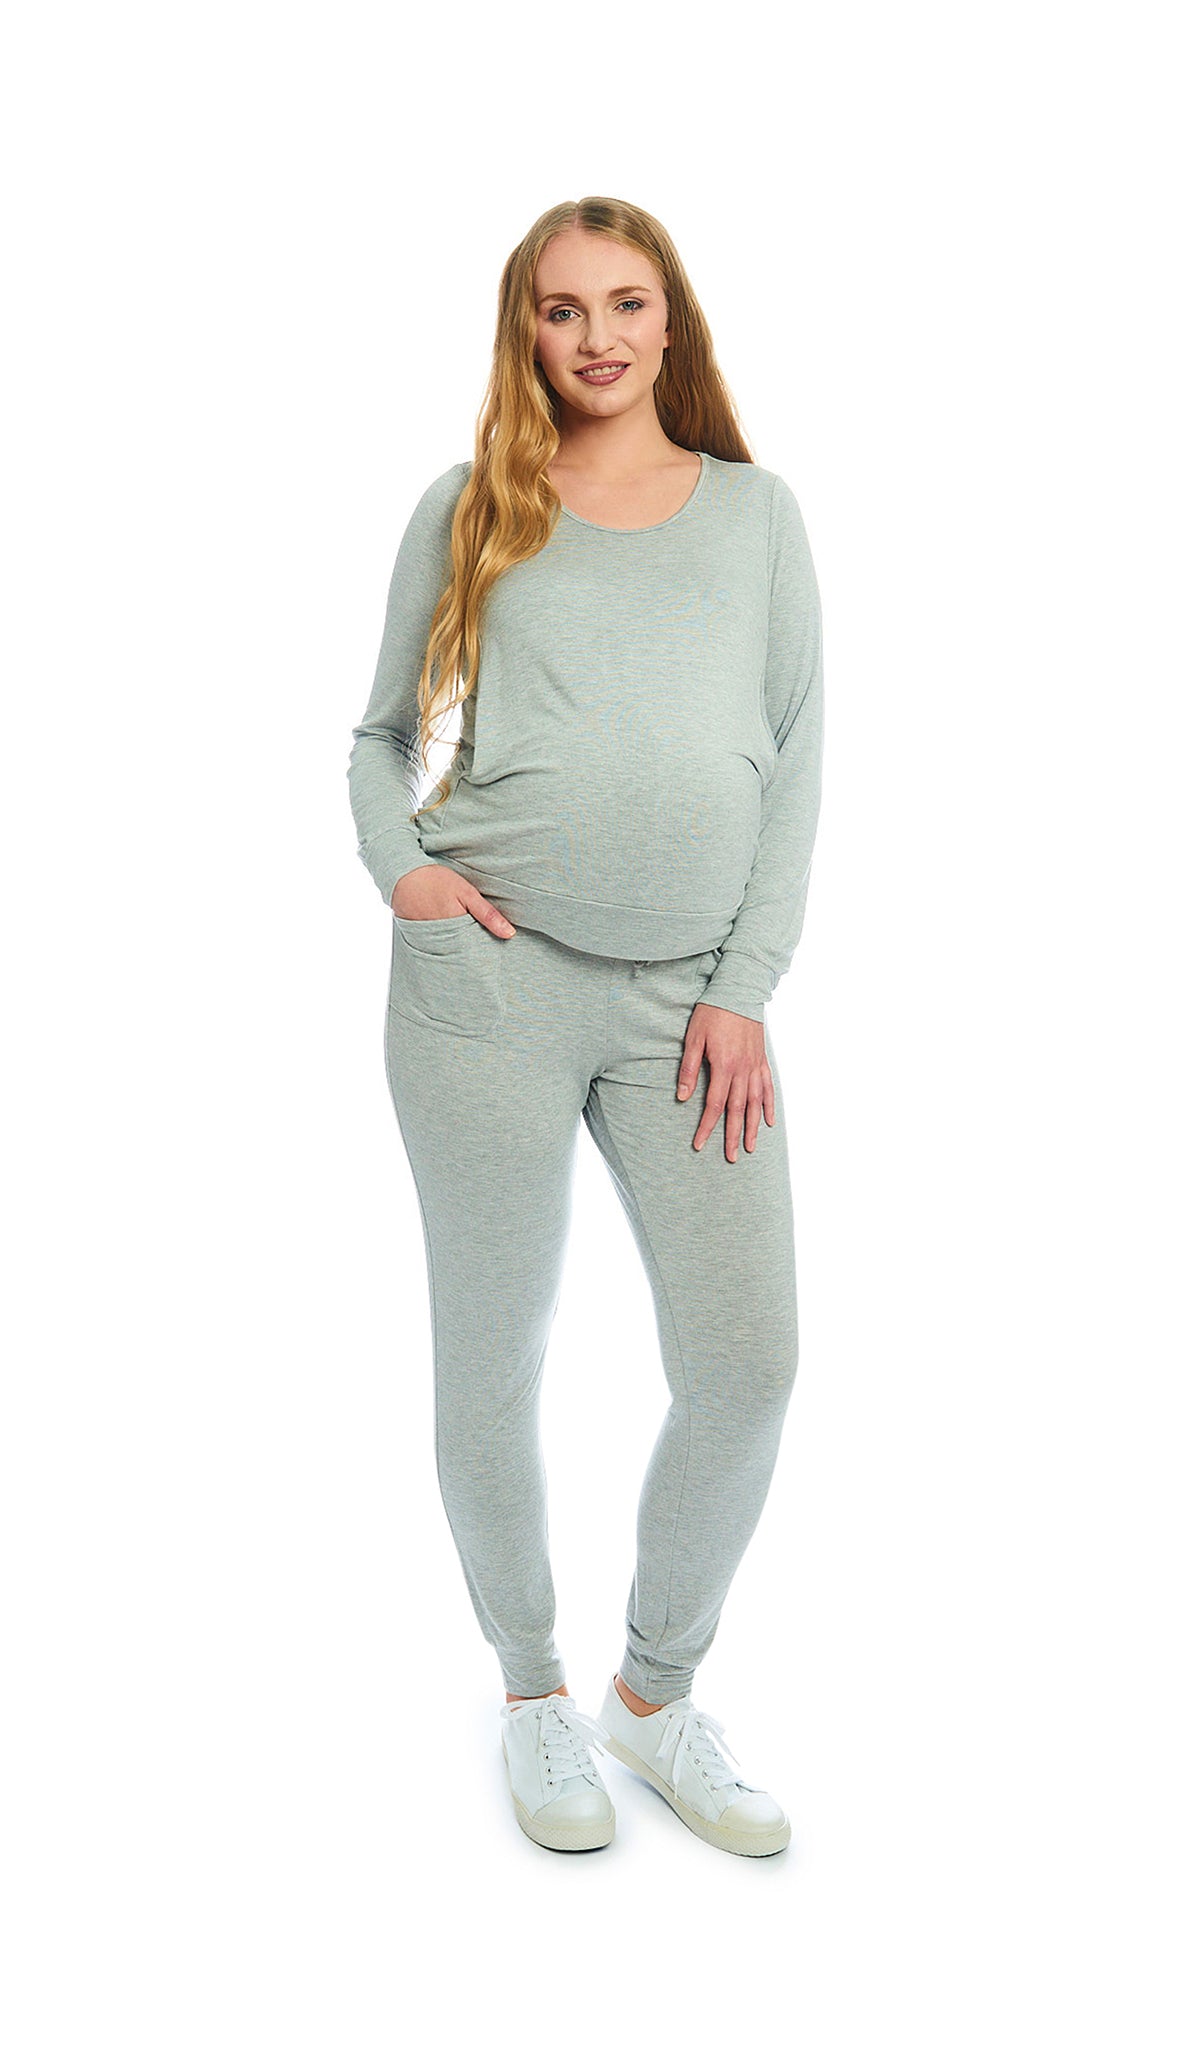 Heather Grey Solid Whitney 2-Piece on pregnant figure. Long sleeve top with nursing access and long pant with cuff hem.